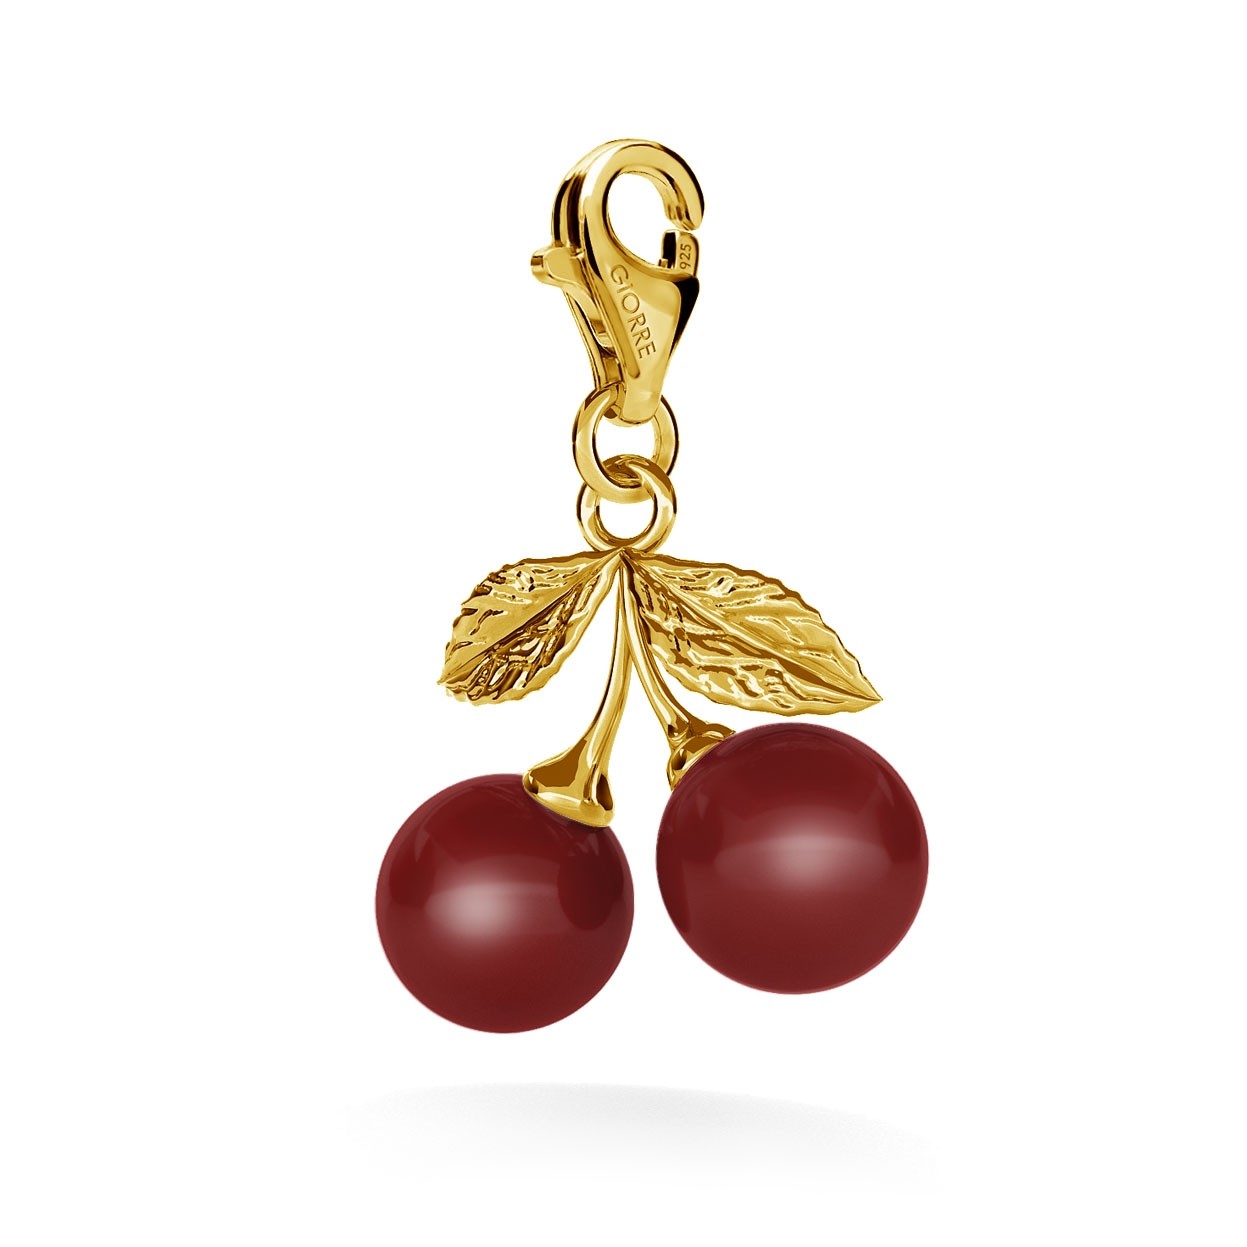 CHARM 33, CHERRY, SILVER 925, RHODIUM OR GOLD PLATED